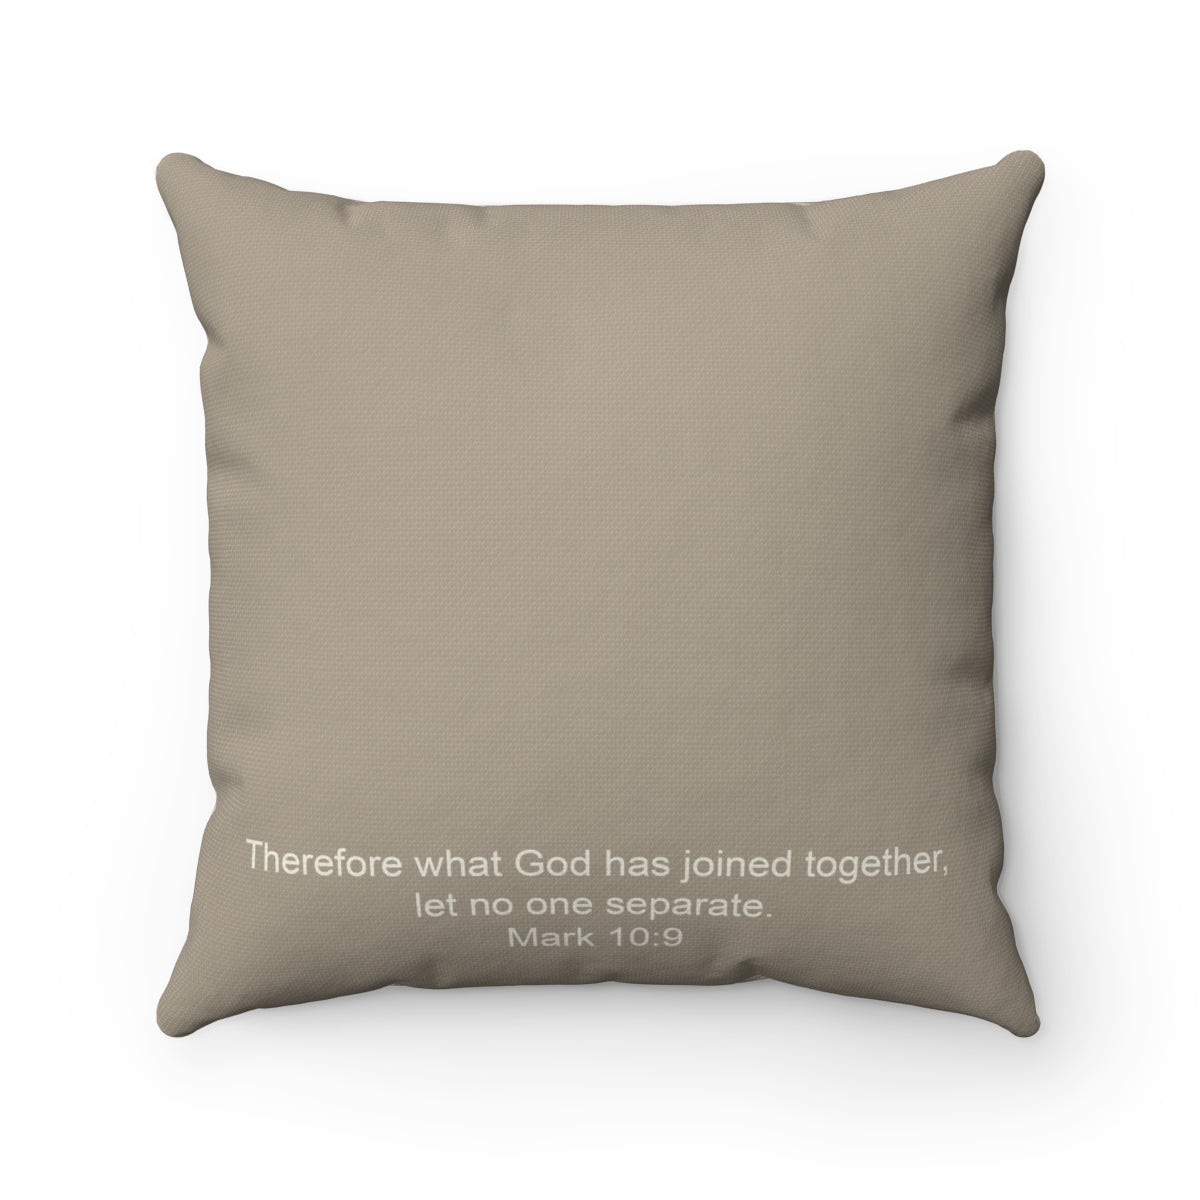 Chateau Personalized Wine Pillow